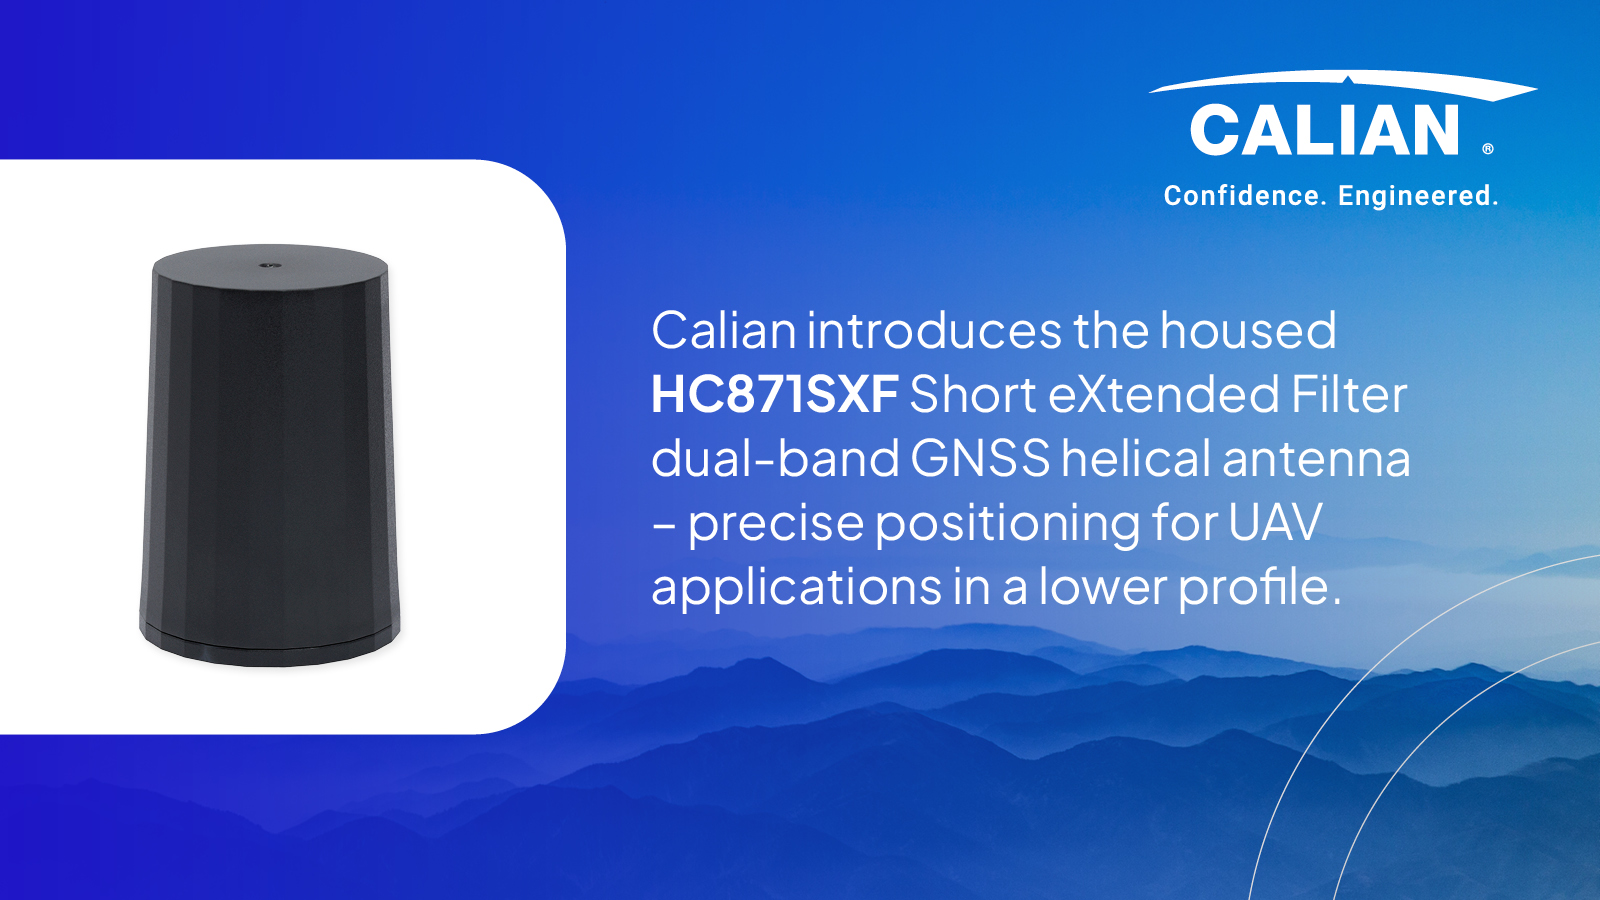 Calian introduces the housed HC871SXF Short, eXtended Filter, dual-band GNSS Helical Antenna